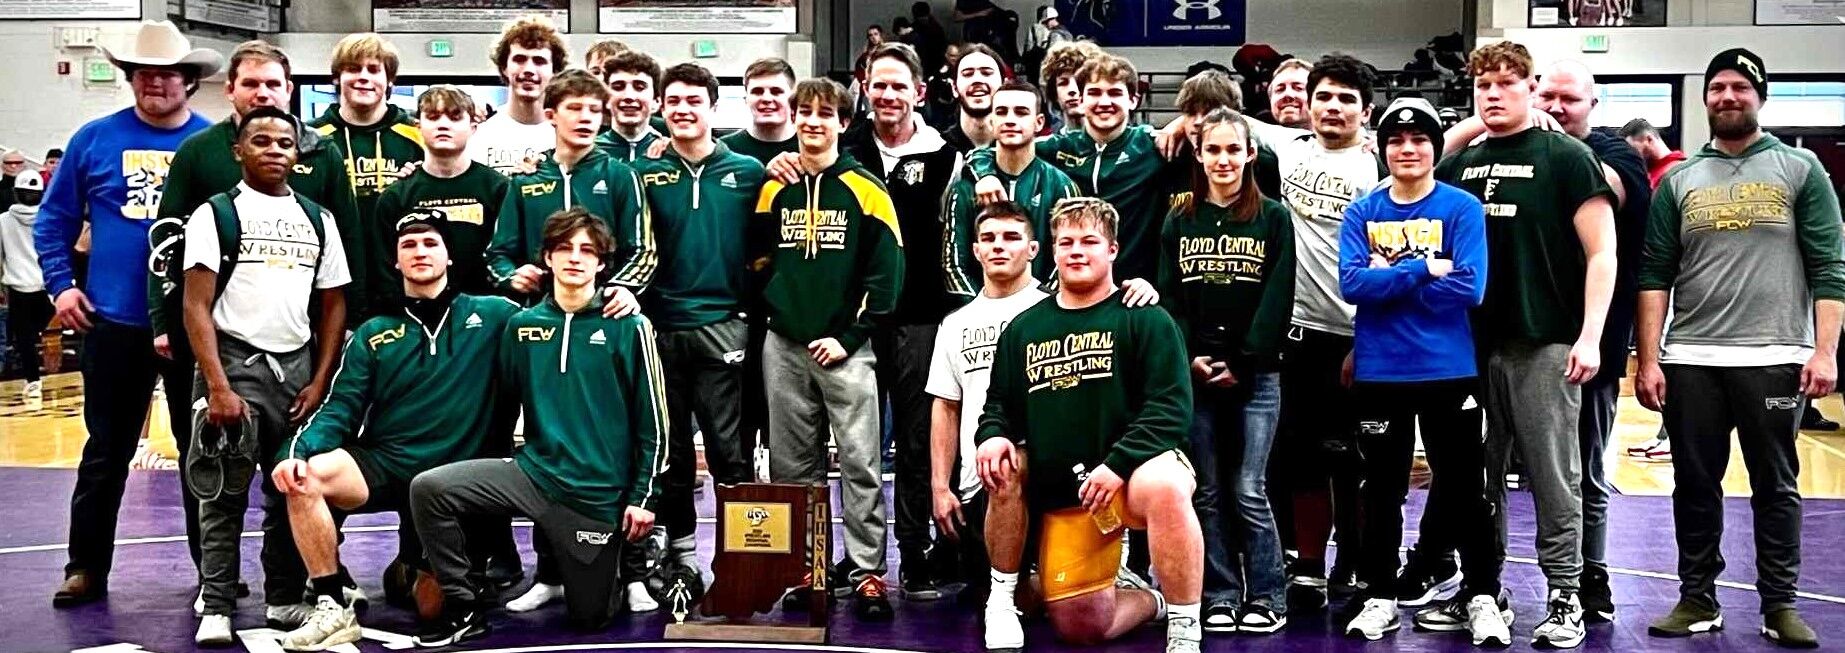 Floyd Central Highlanders Secure Victory at Bloomington South Regional Championship